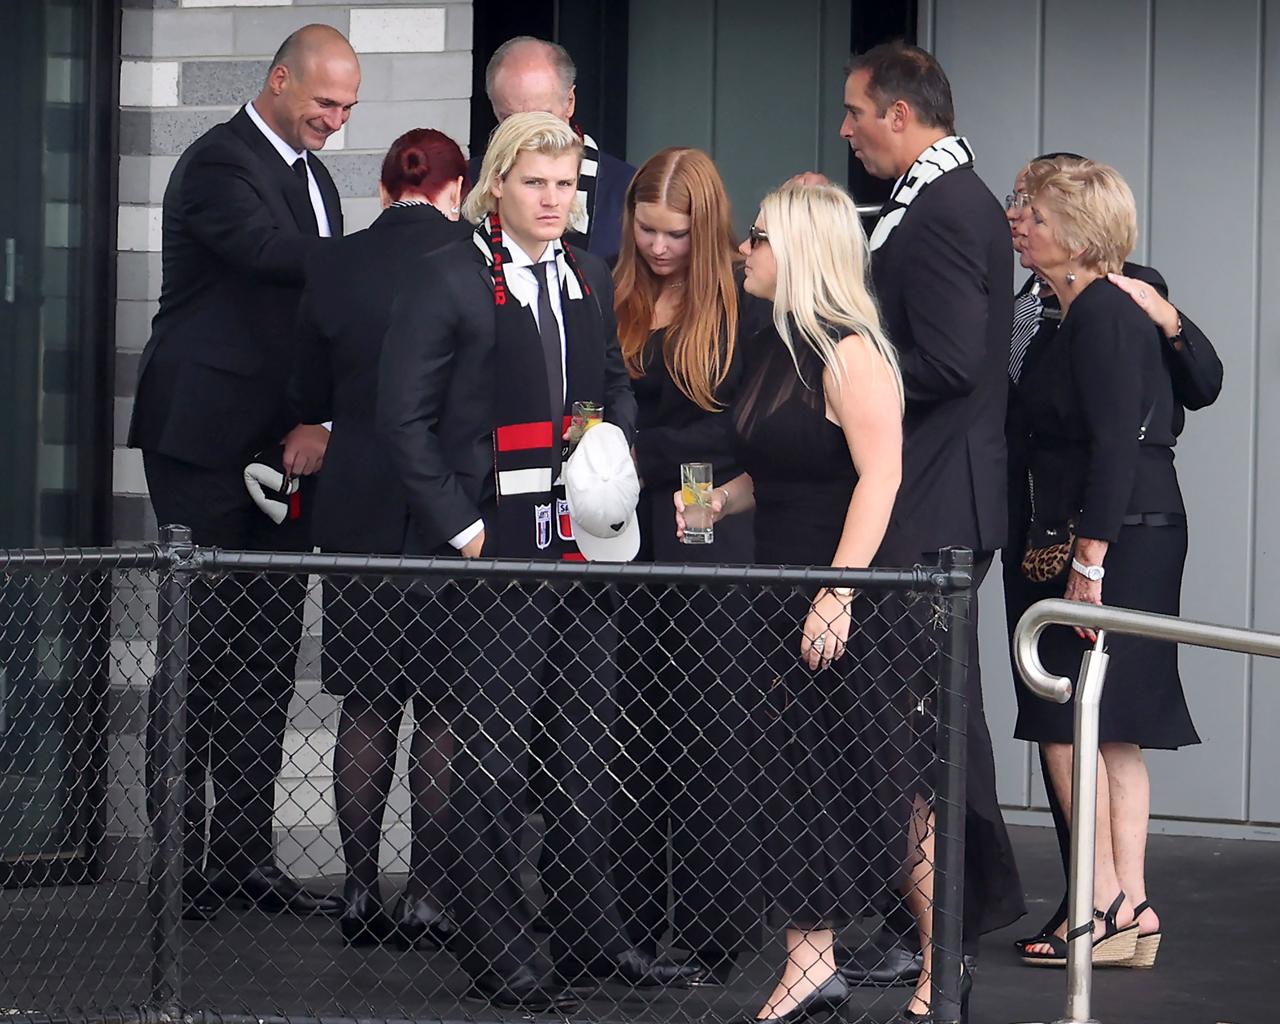 The family watches the hearse carrying Australian cricket superstar Shane Warne depart after a lap of the ground during a private memorial service at the St Kilda Football Club in Melbourne on March 20, 2022